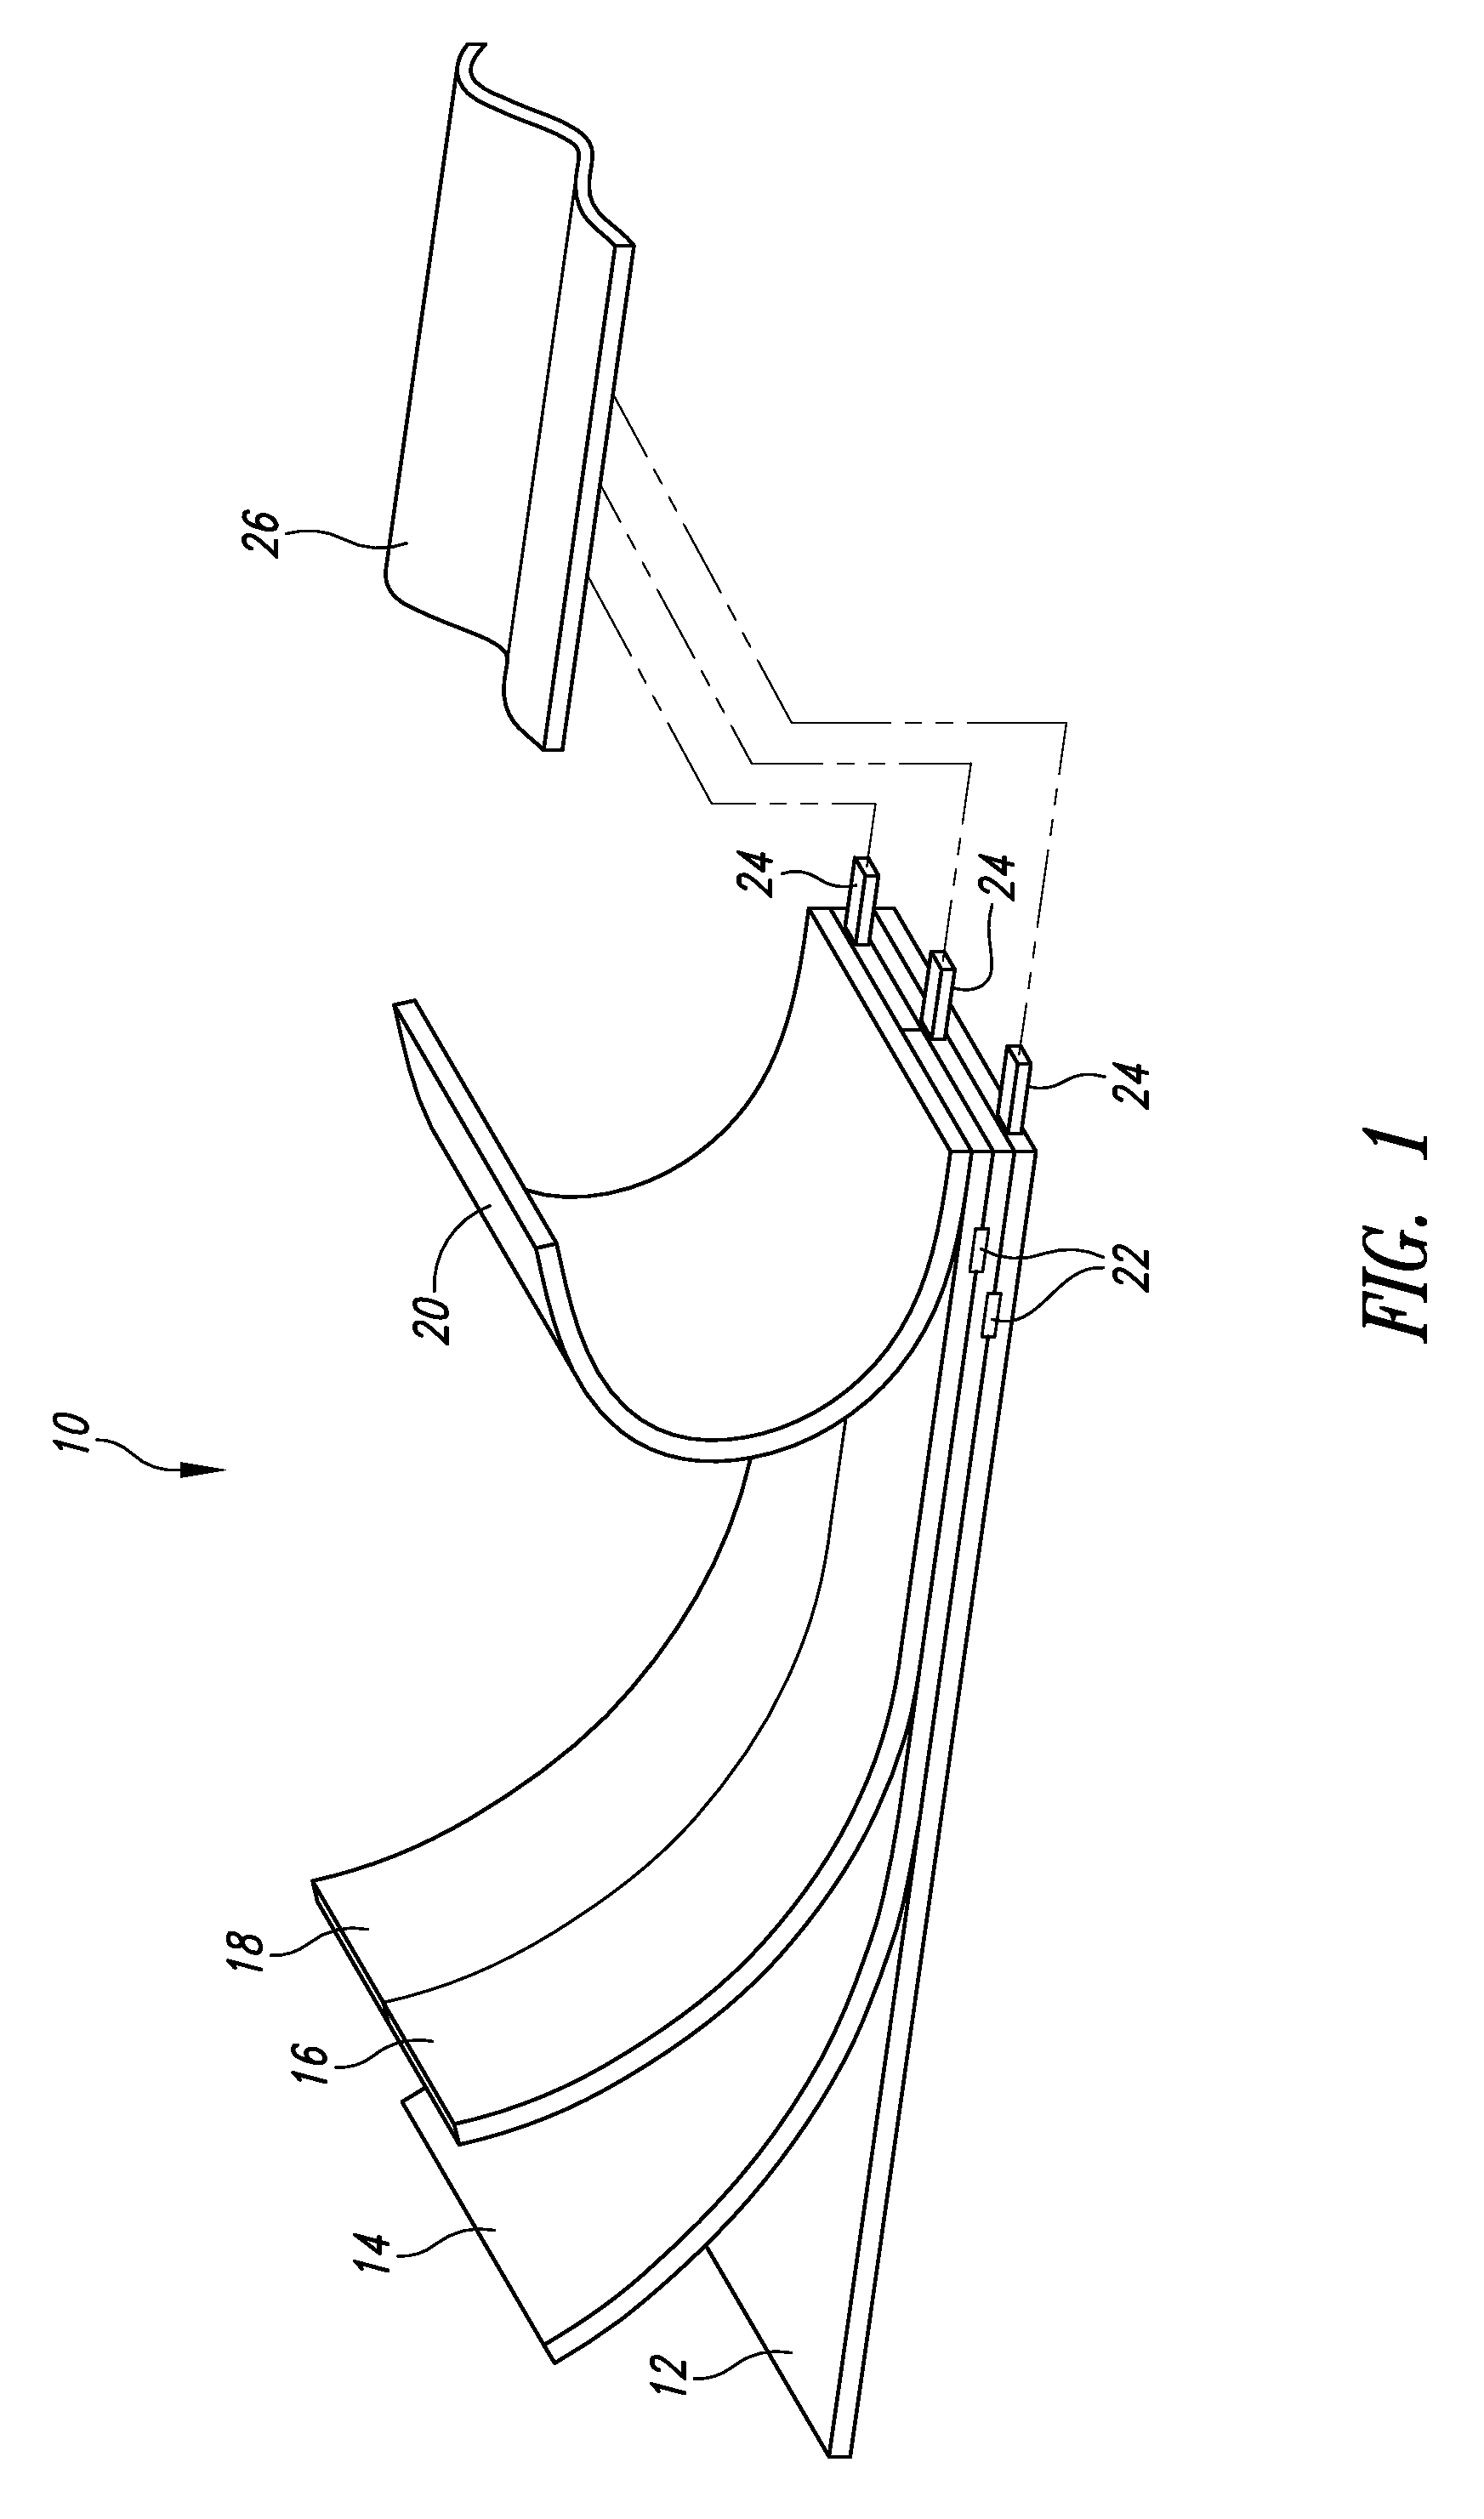 Thin film energy fabric integration, control and method of making